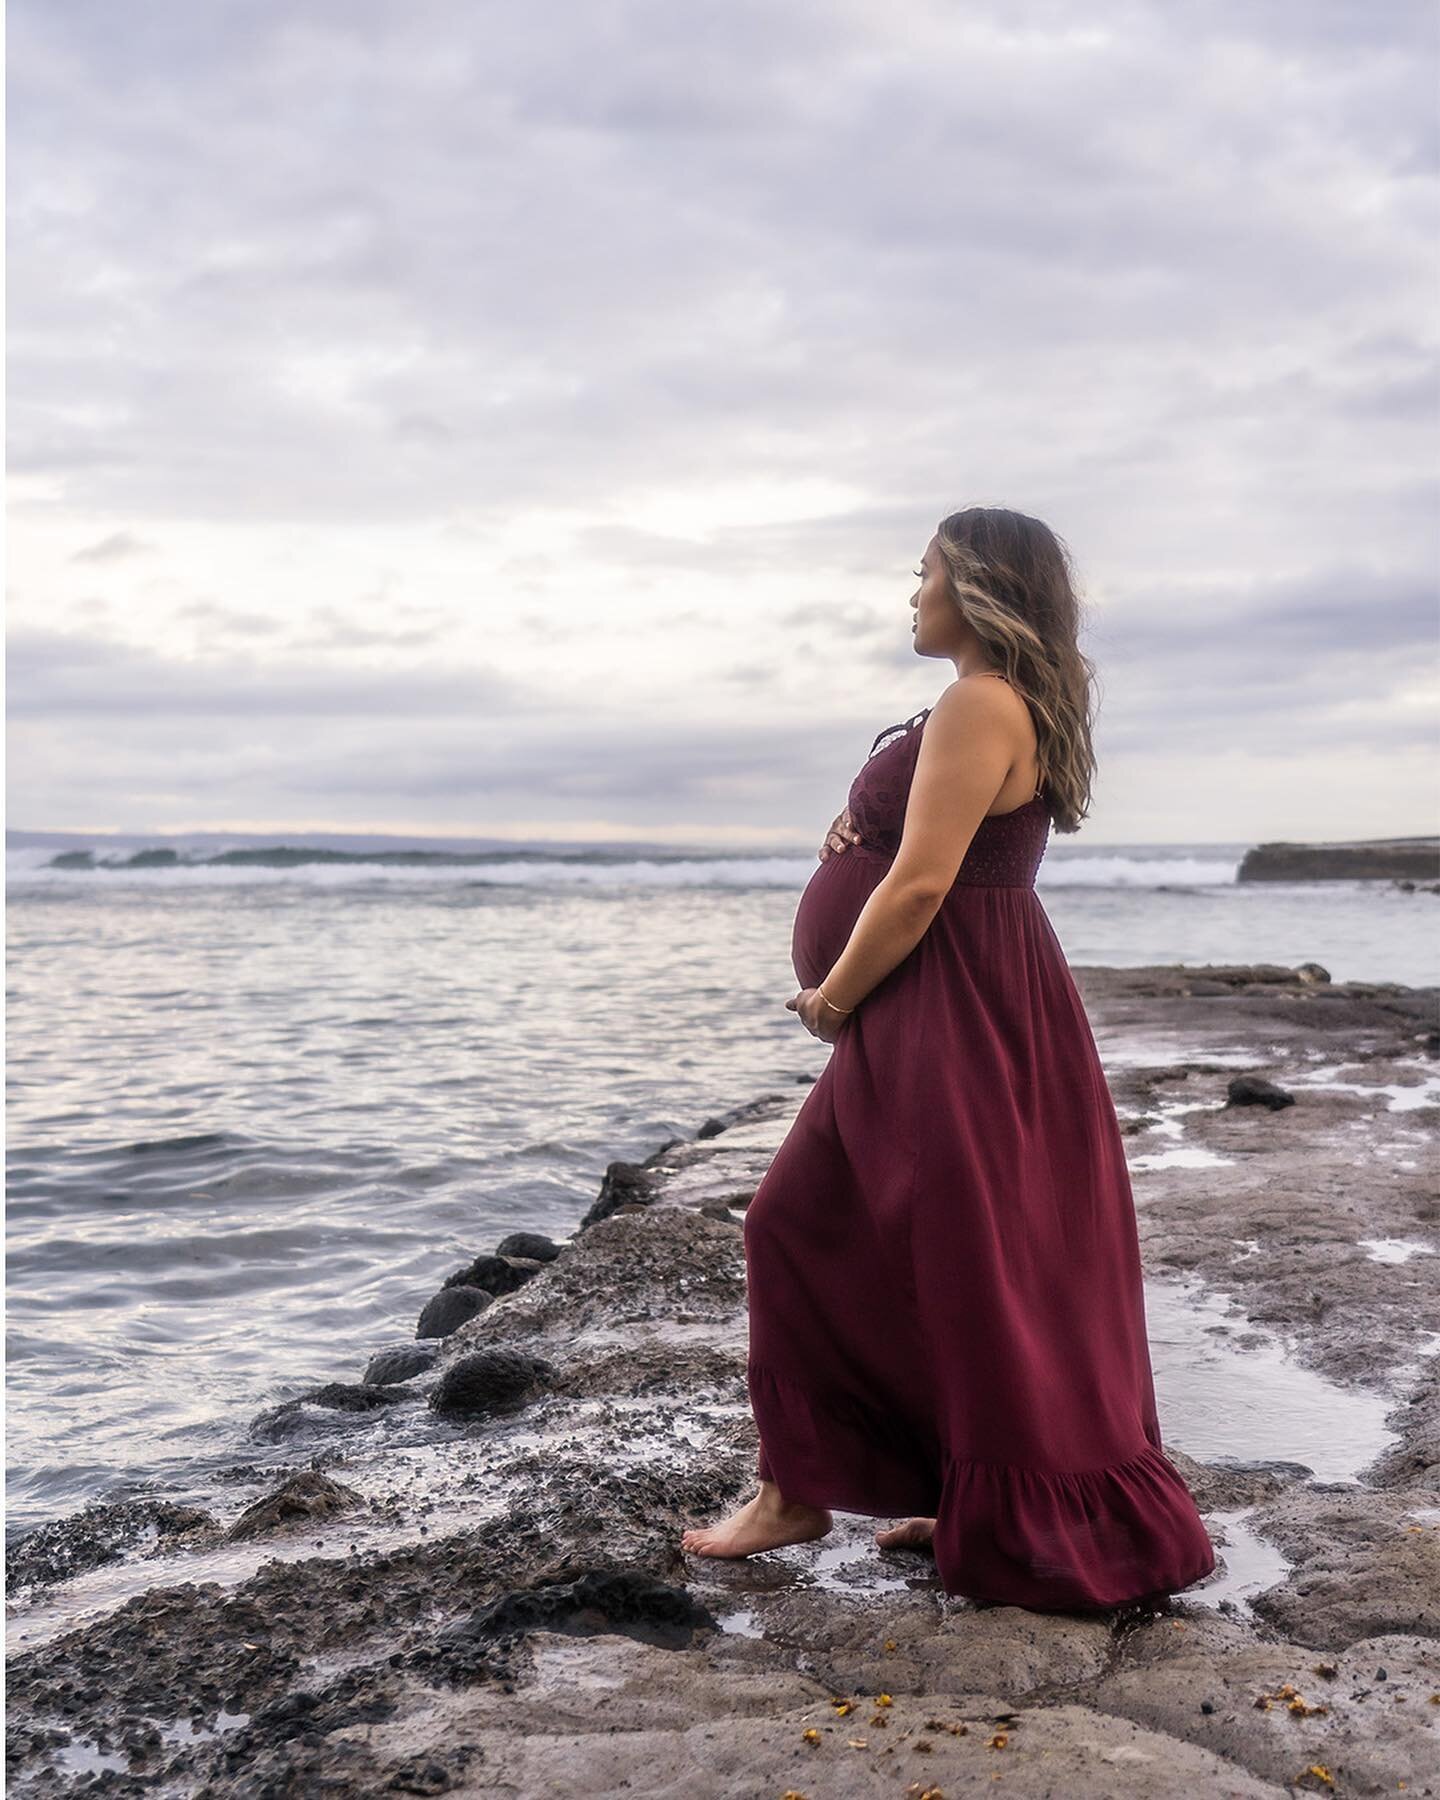 I&rsquo;m so excited to share these maternity photos I created for Collee &amp; Vili. I am so grateful to have captured these moments before their beautiful baby boy is born. 💙💙💙